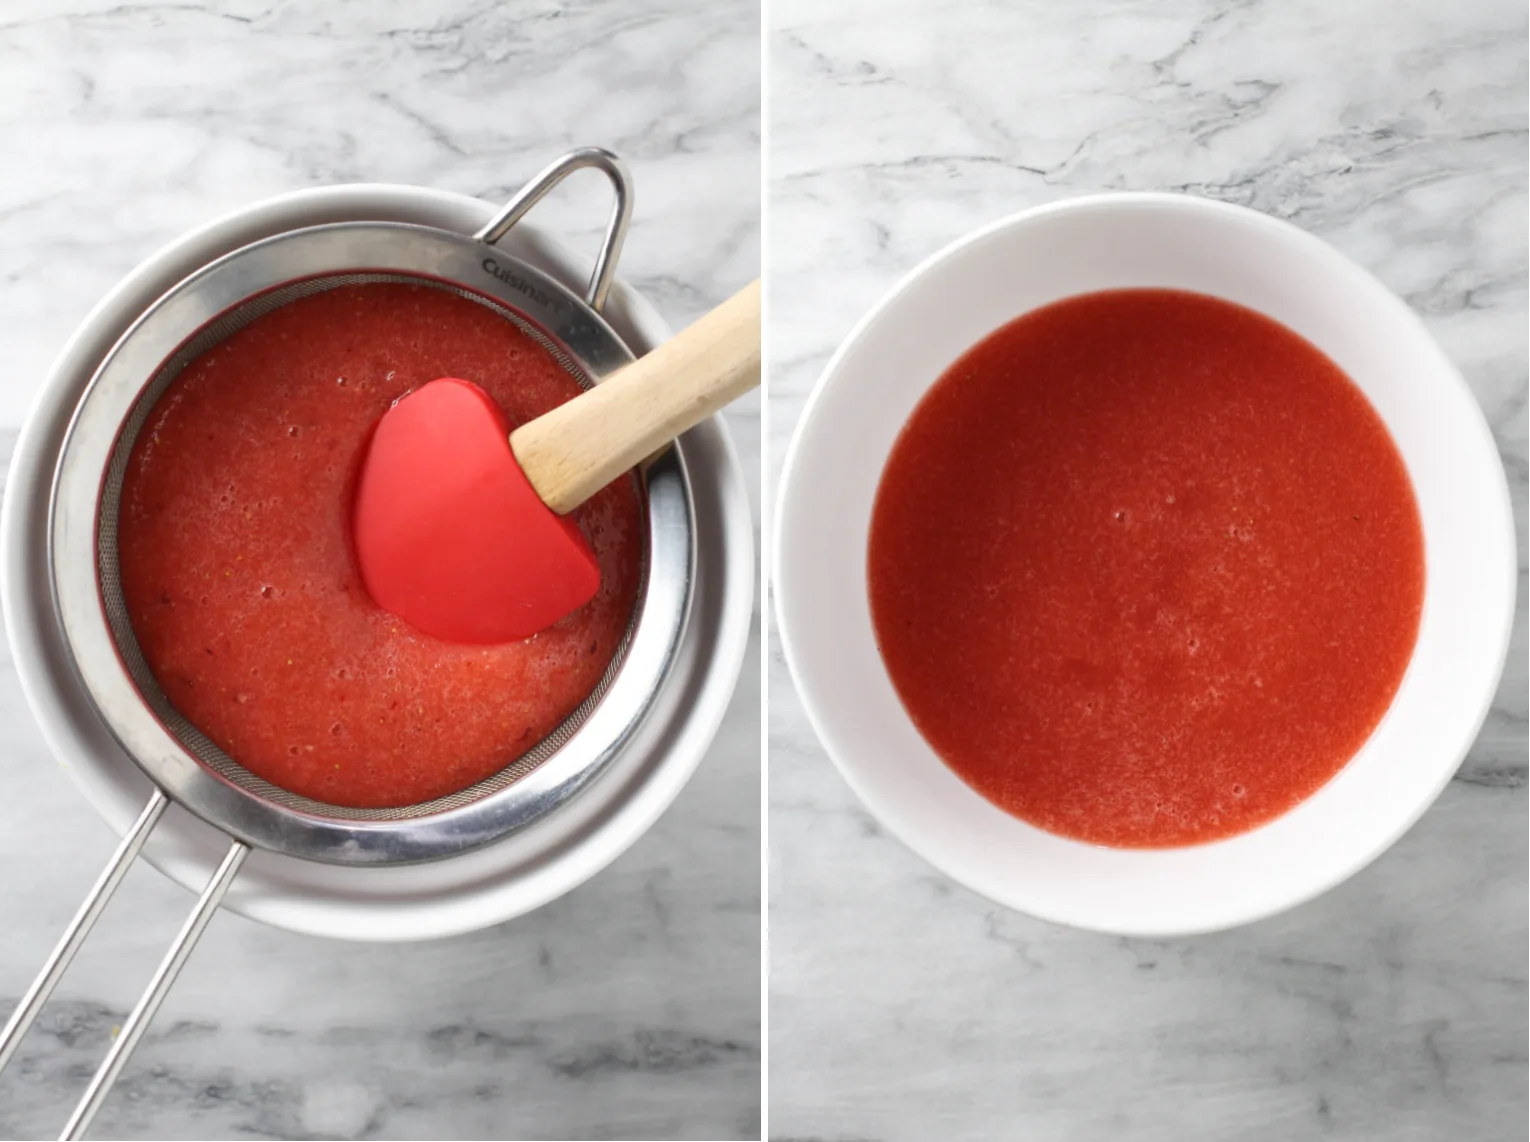 Two side-by-side images. On the left image, strawberry puree in a fine mesh sieve placed over a bowl. On the right image, strained strawberry juice in a bowl.